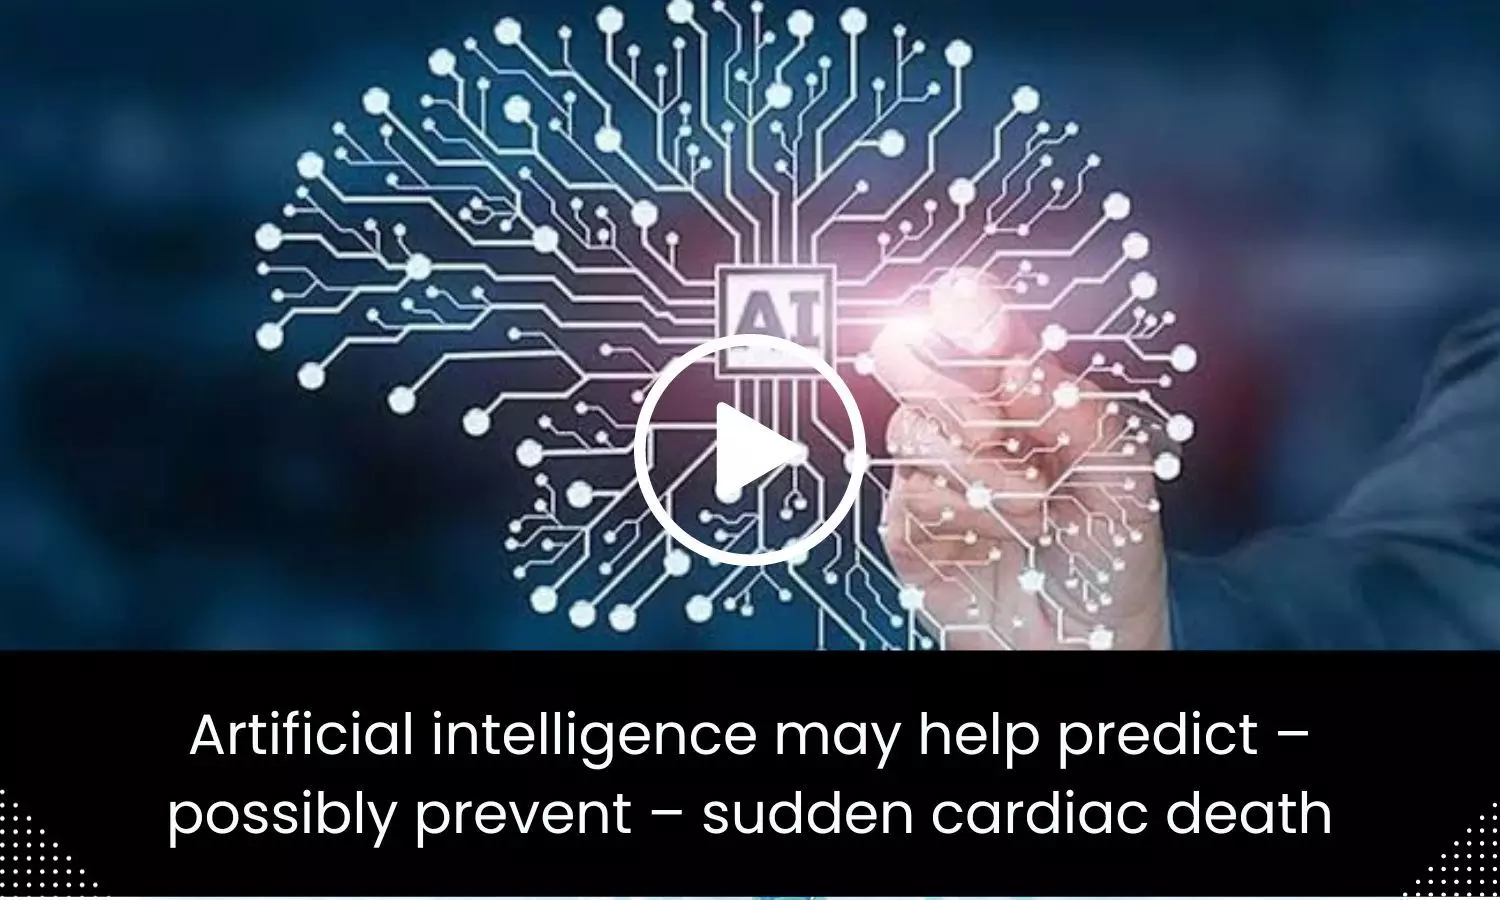 Artificial intelligence may help predict-possibly prevent-sudden cardiac death